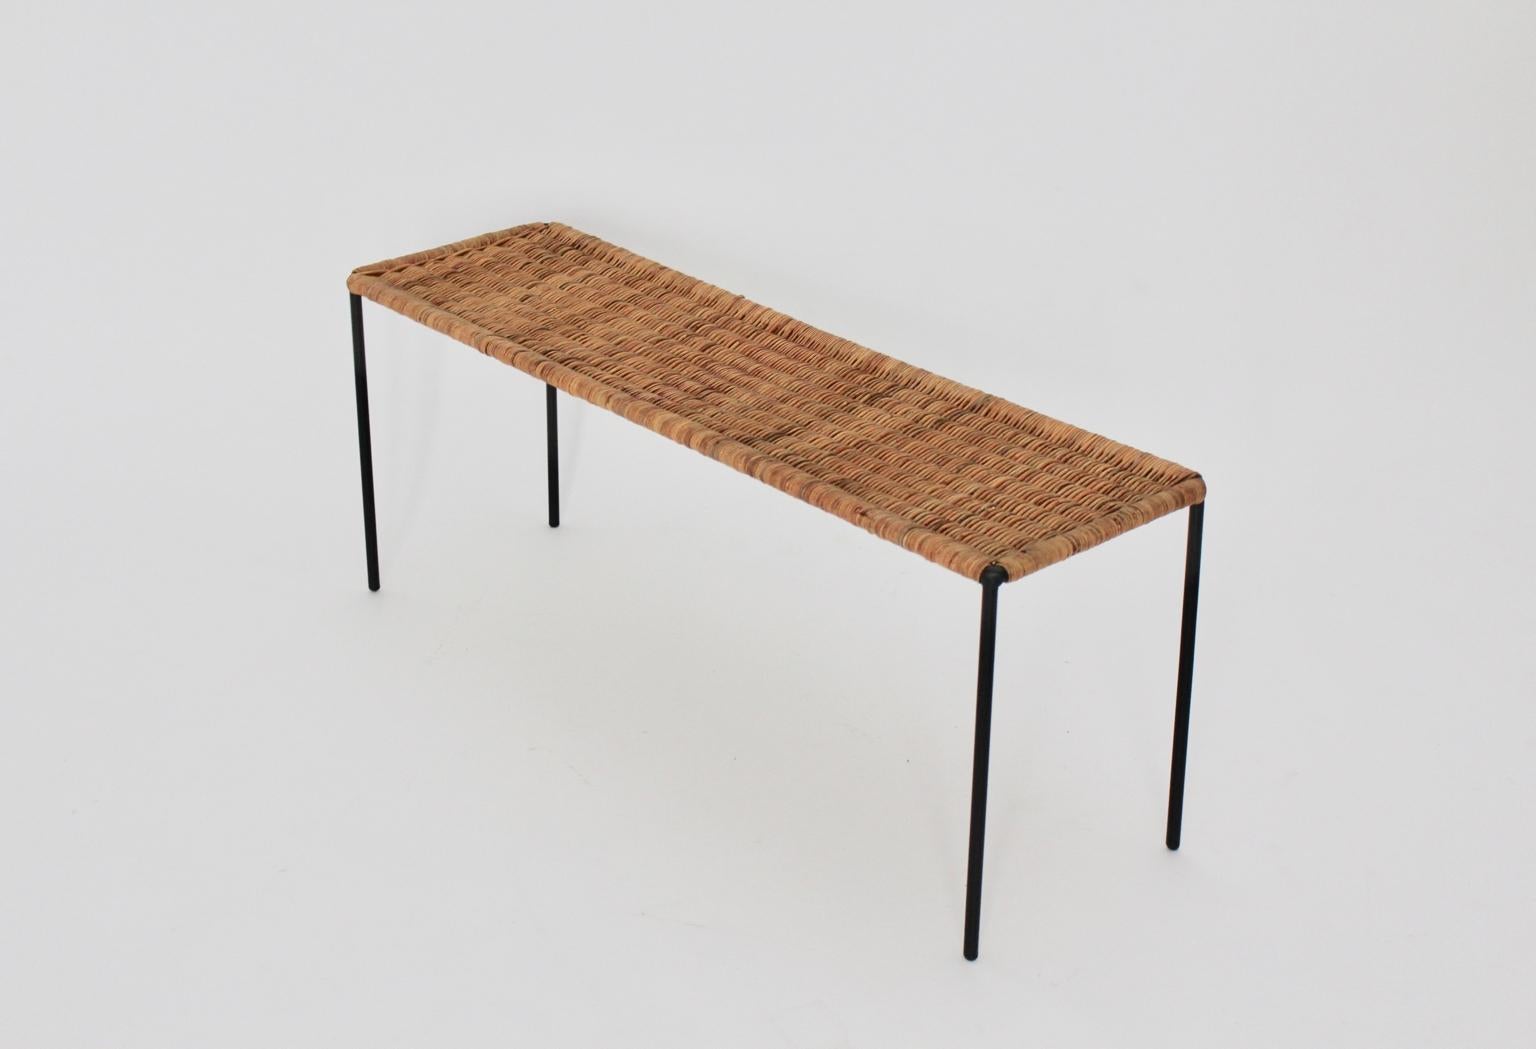 Lacquered Mid-Century Modern Vintage Metal Wicker Side Table by Carl Auböck 1950s, Vienna For Sale